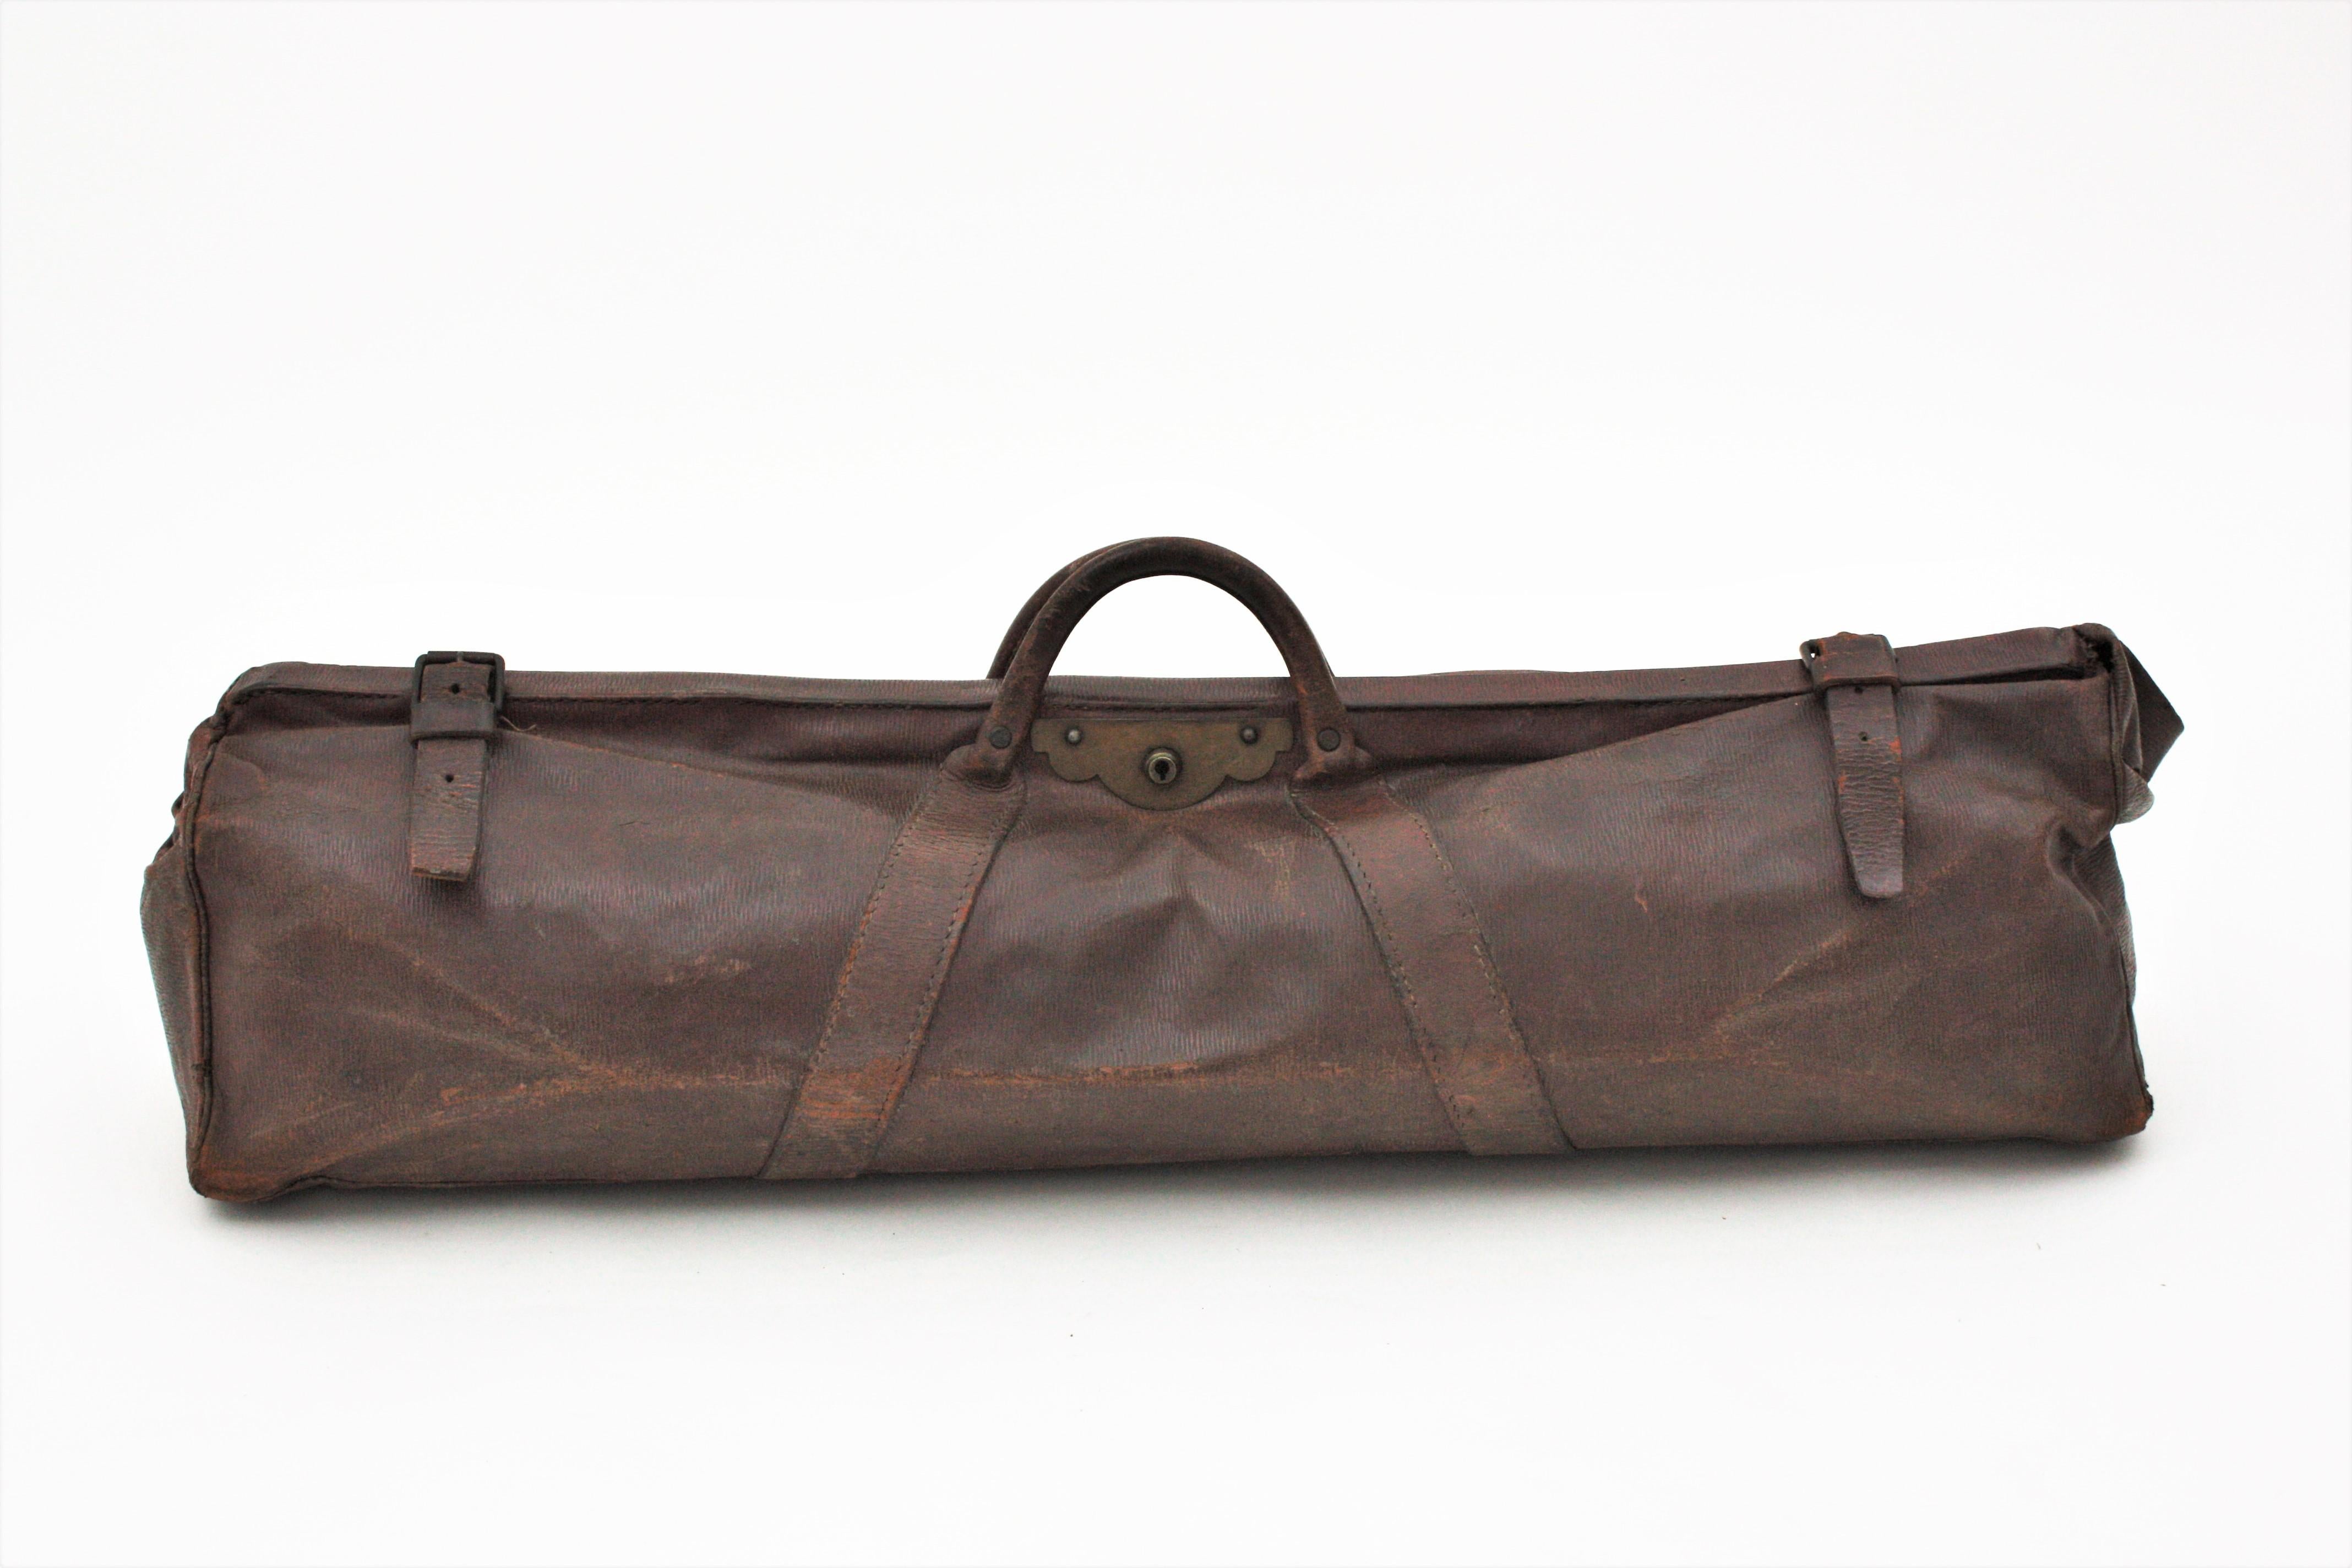 Leather cricket kit bag, England, 1920s.
For decorative purposes or window dressings
Measures: 93 cm W x 26 cm D x 28 cm H (36,61 in W x 10,23 in D x 11,02 in H ).